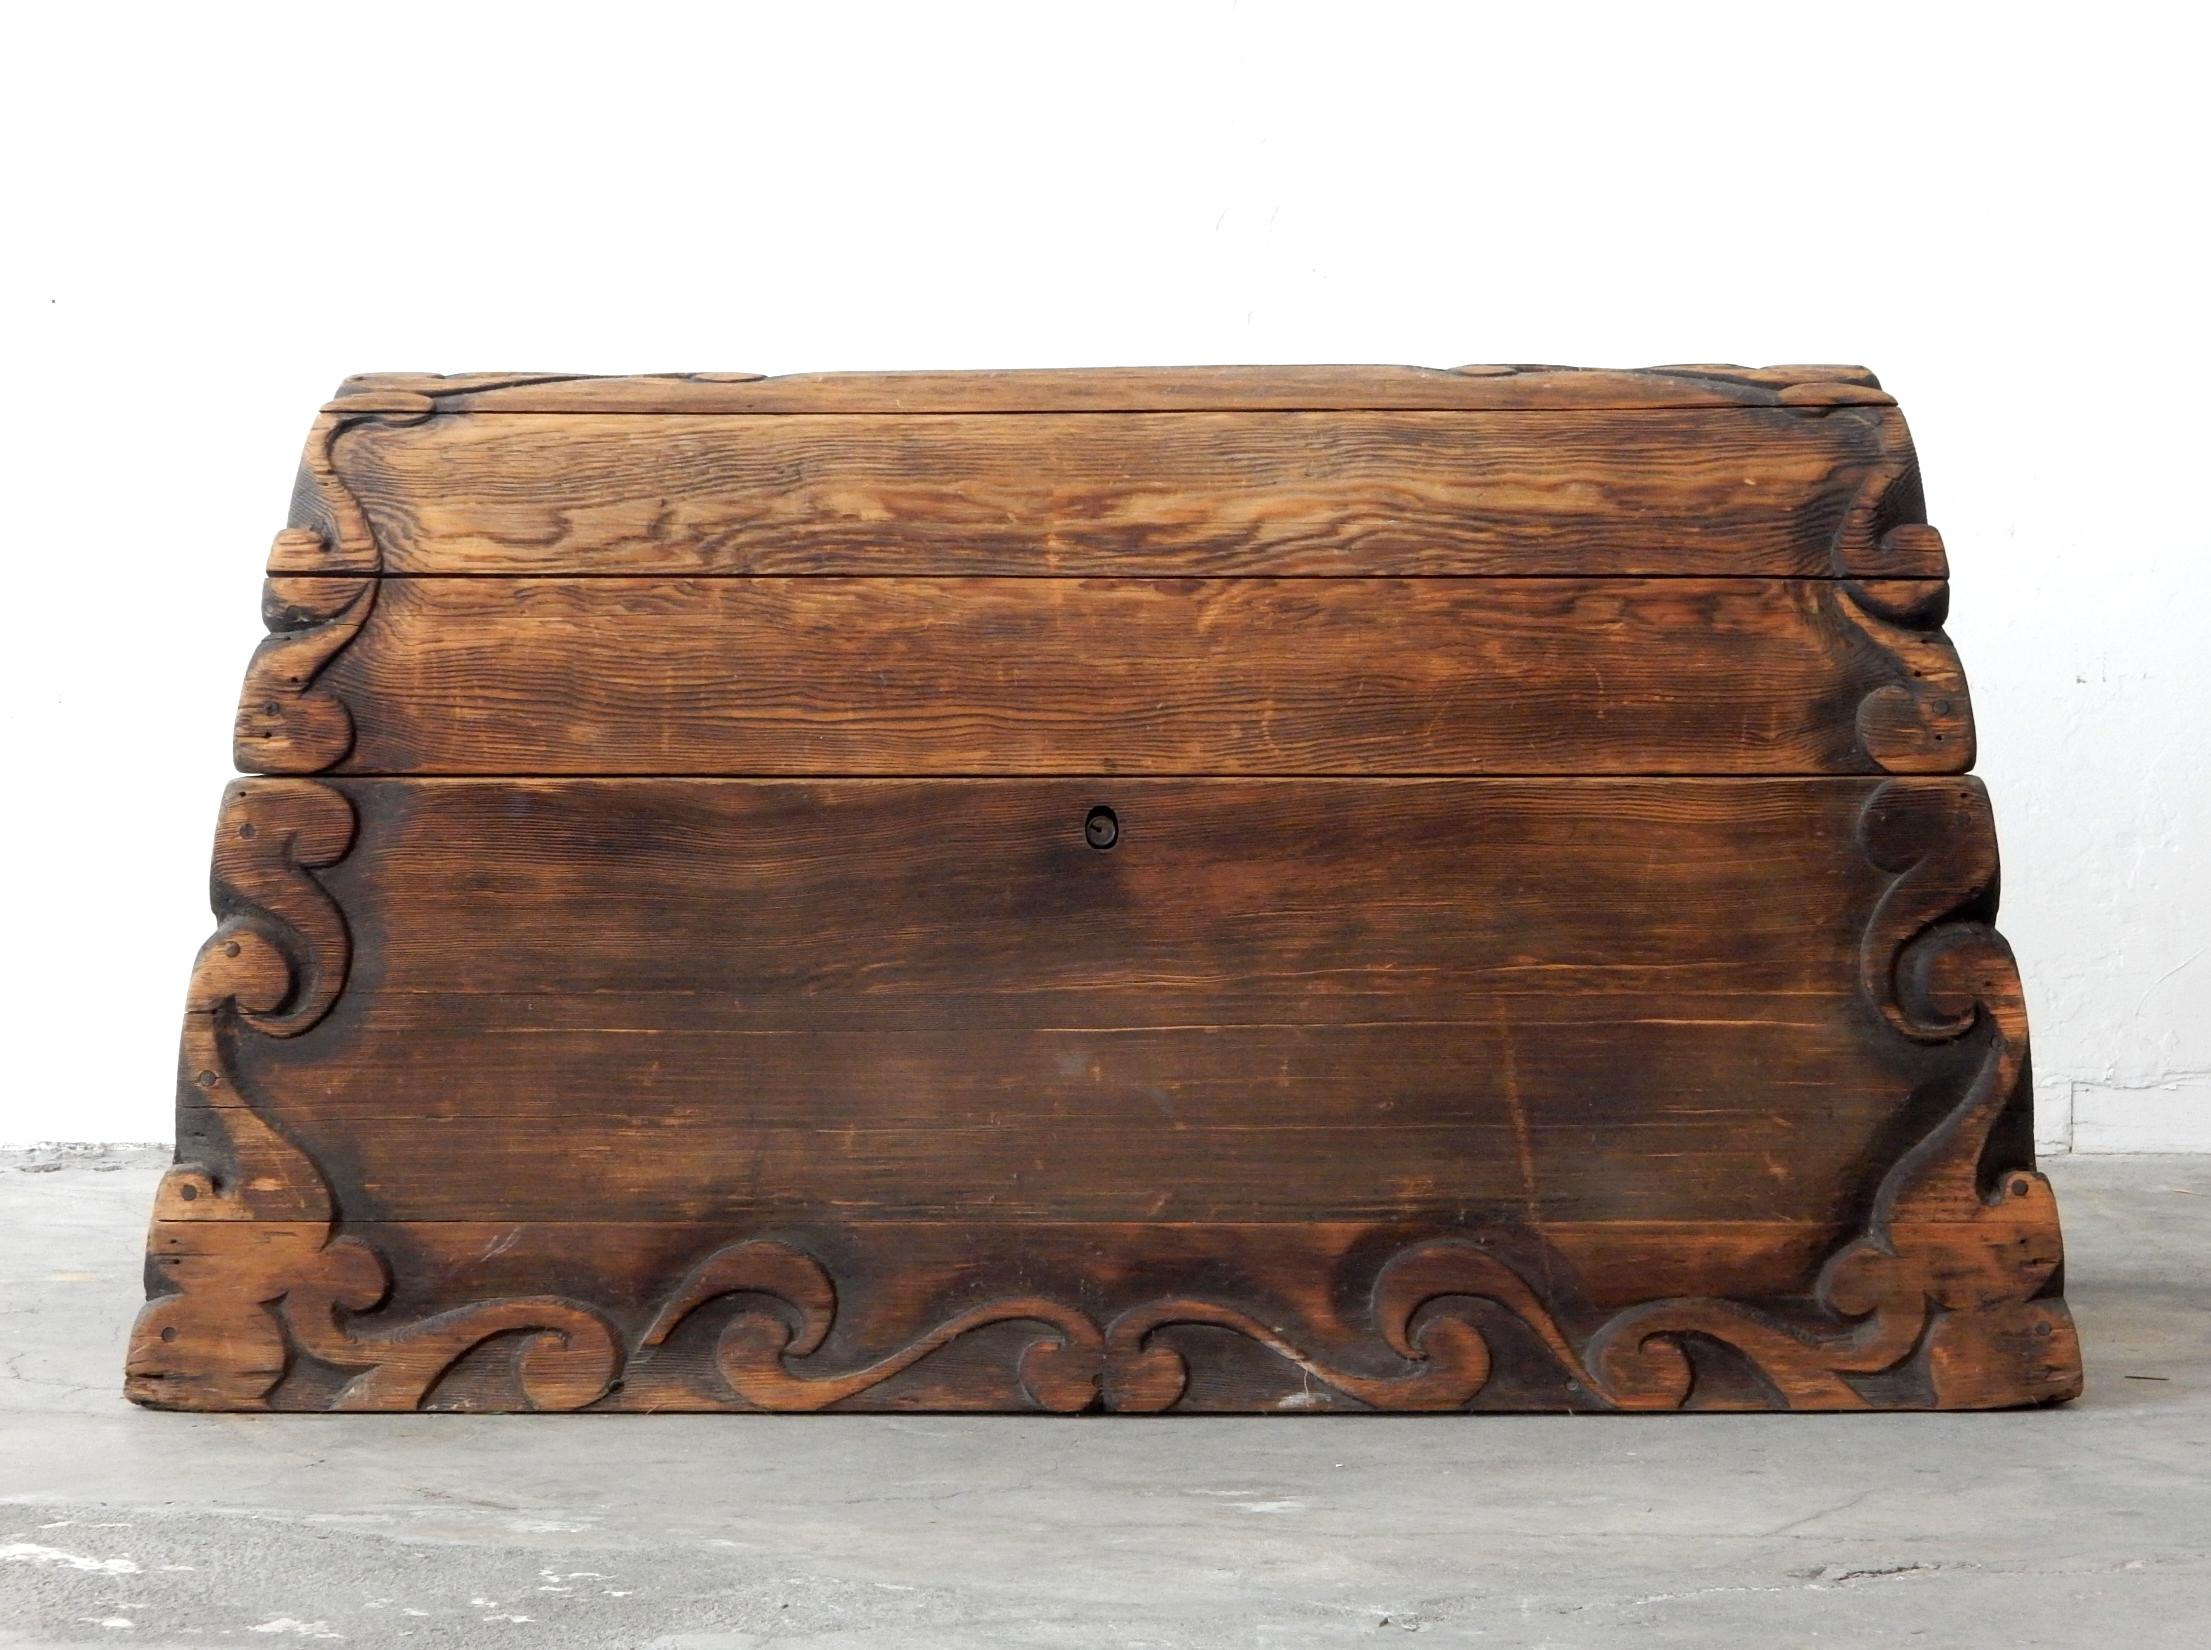 Incredible ornately carved cedar hump blanket chest.
Scroll work carving on edges and top.
Very large, thick and heavy piece all fashioned together with wooden pegs.
Large metal door hinges support lid. Barrel lock, no key,
circa 1960s,